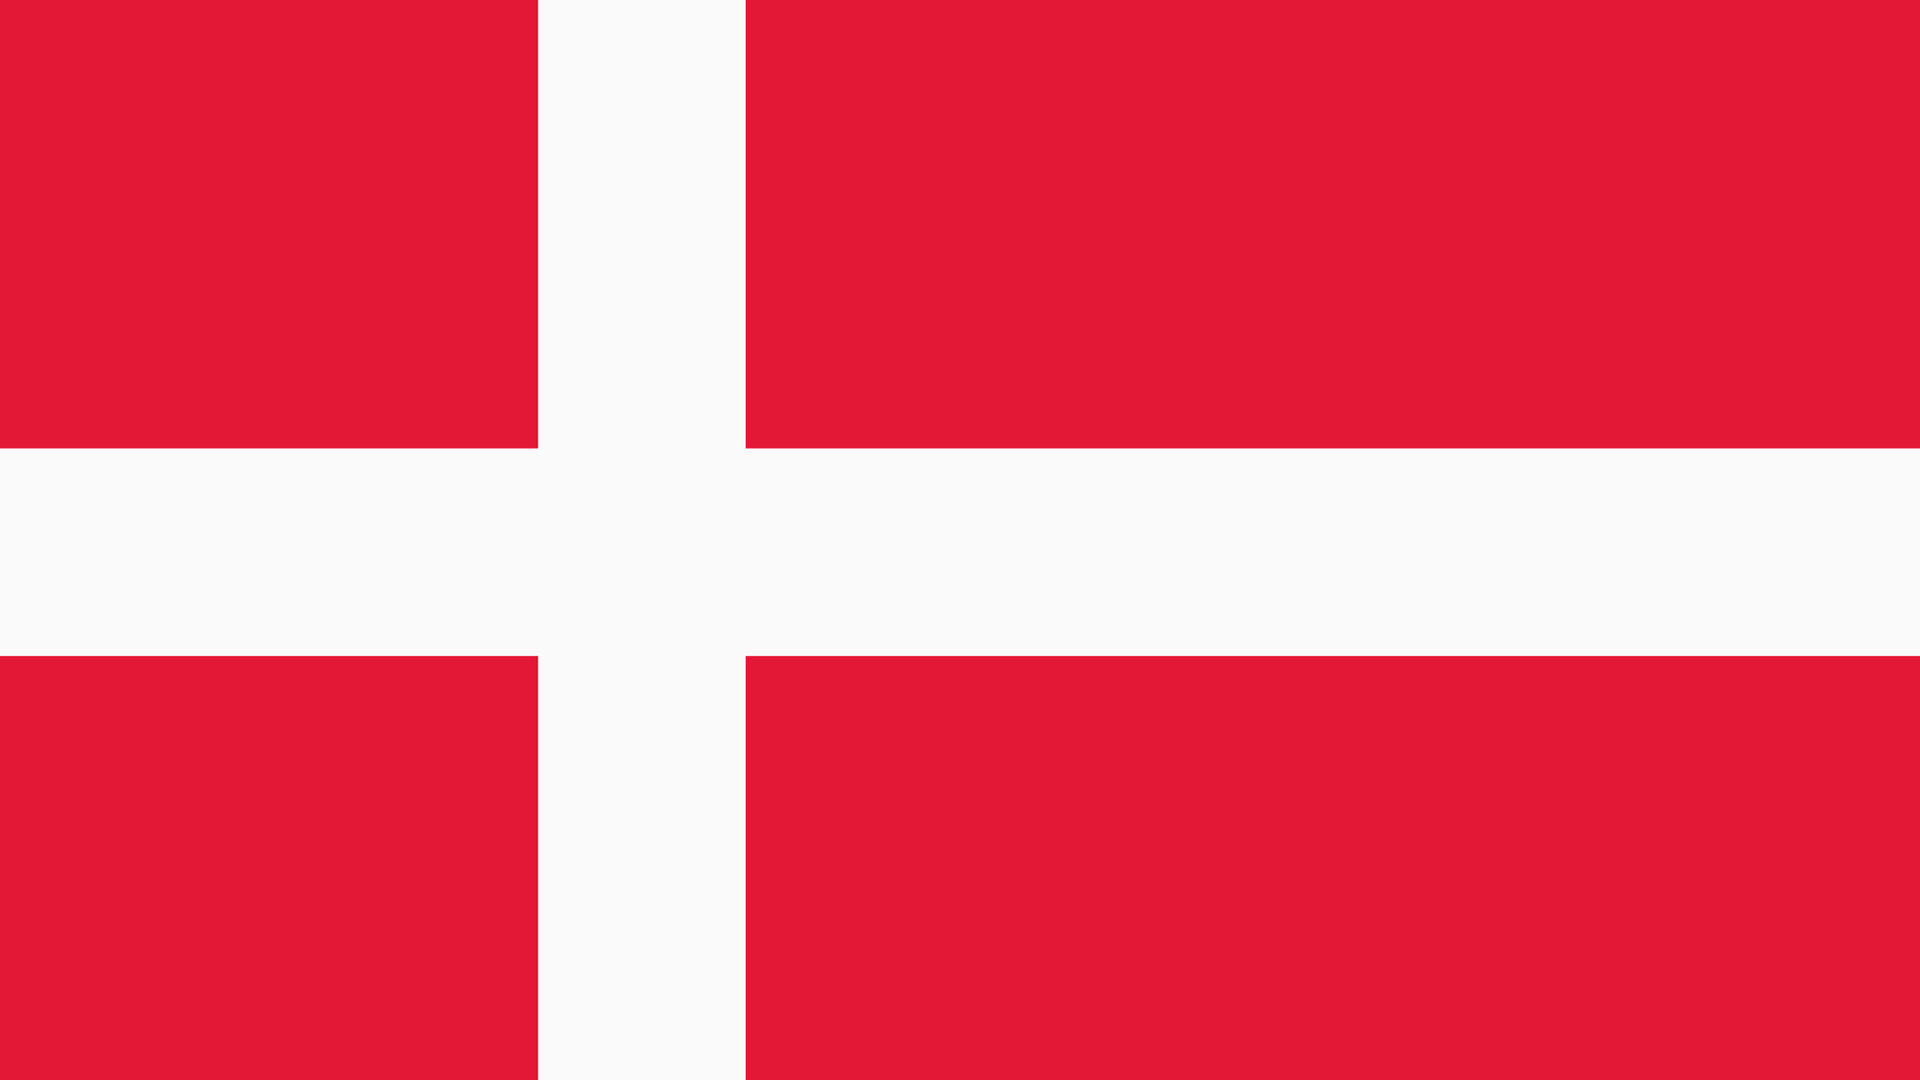 A red and white flag